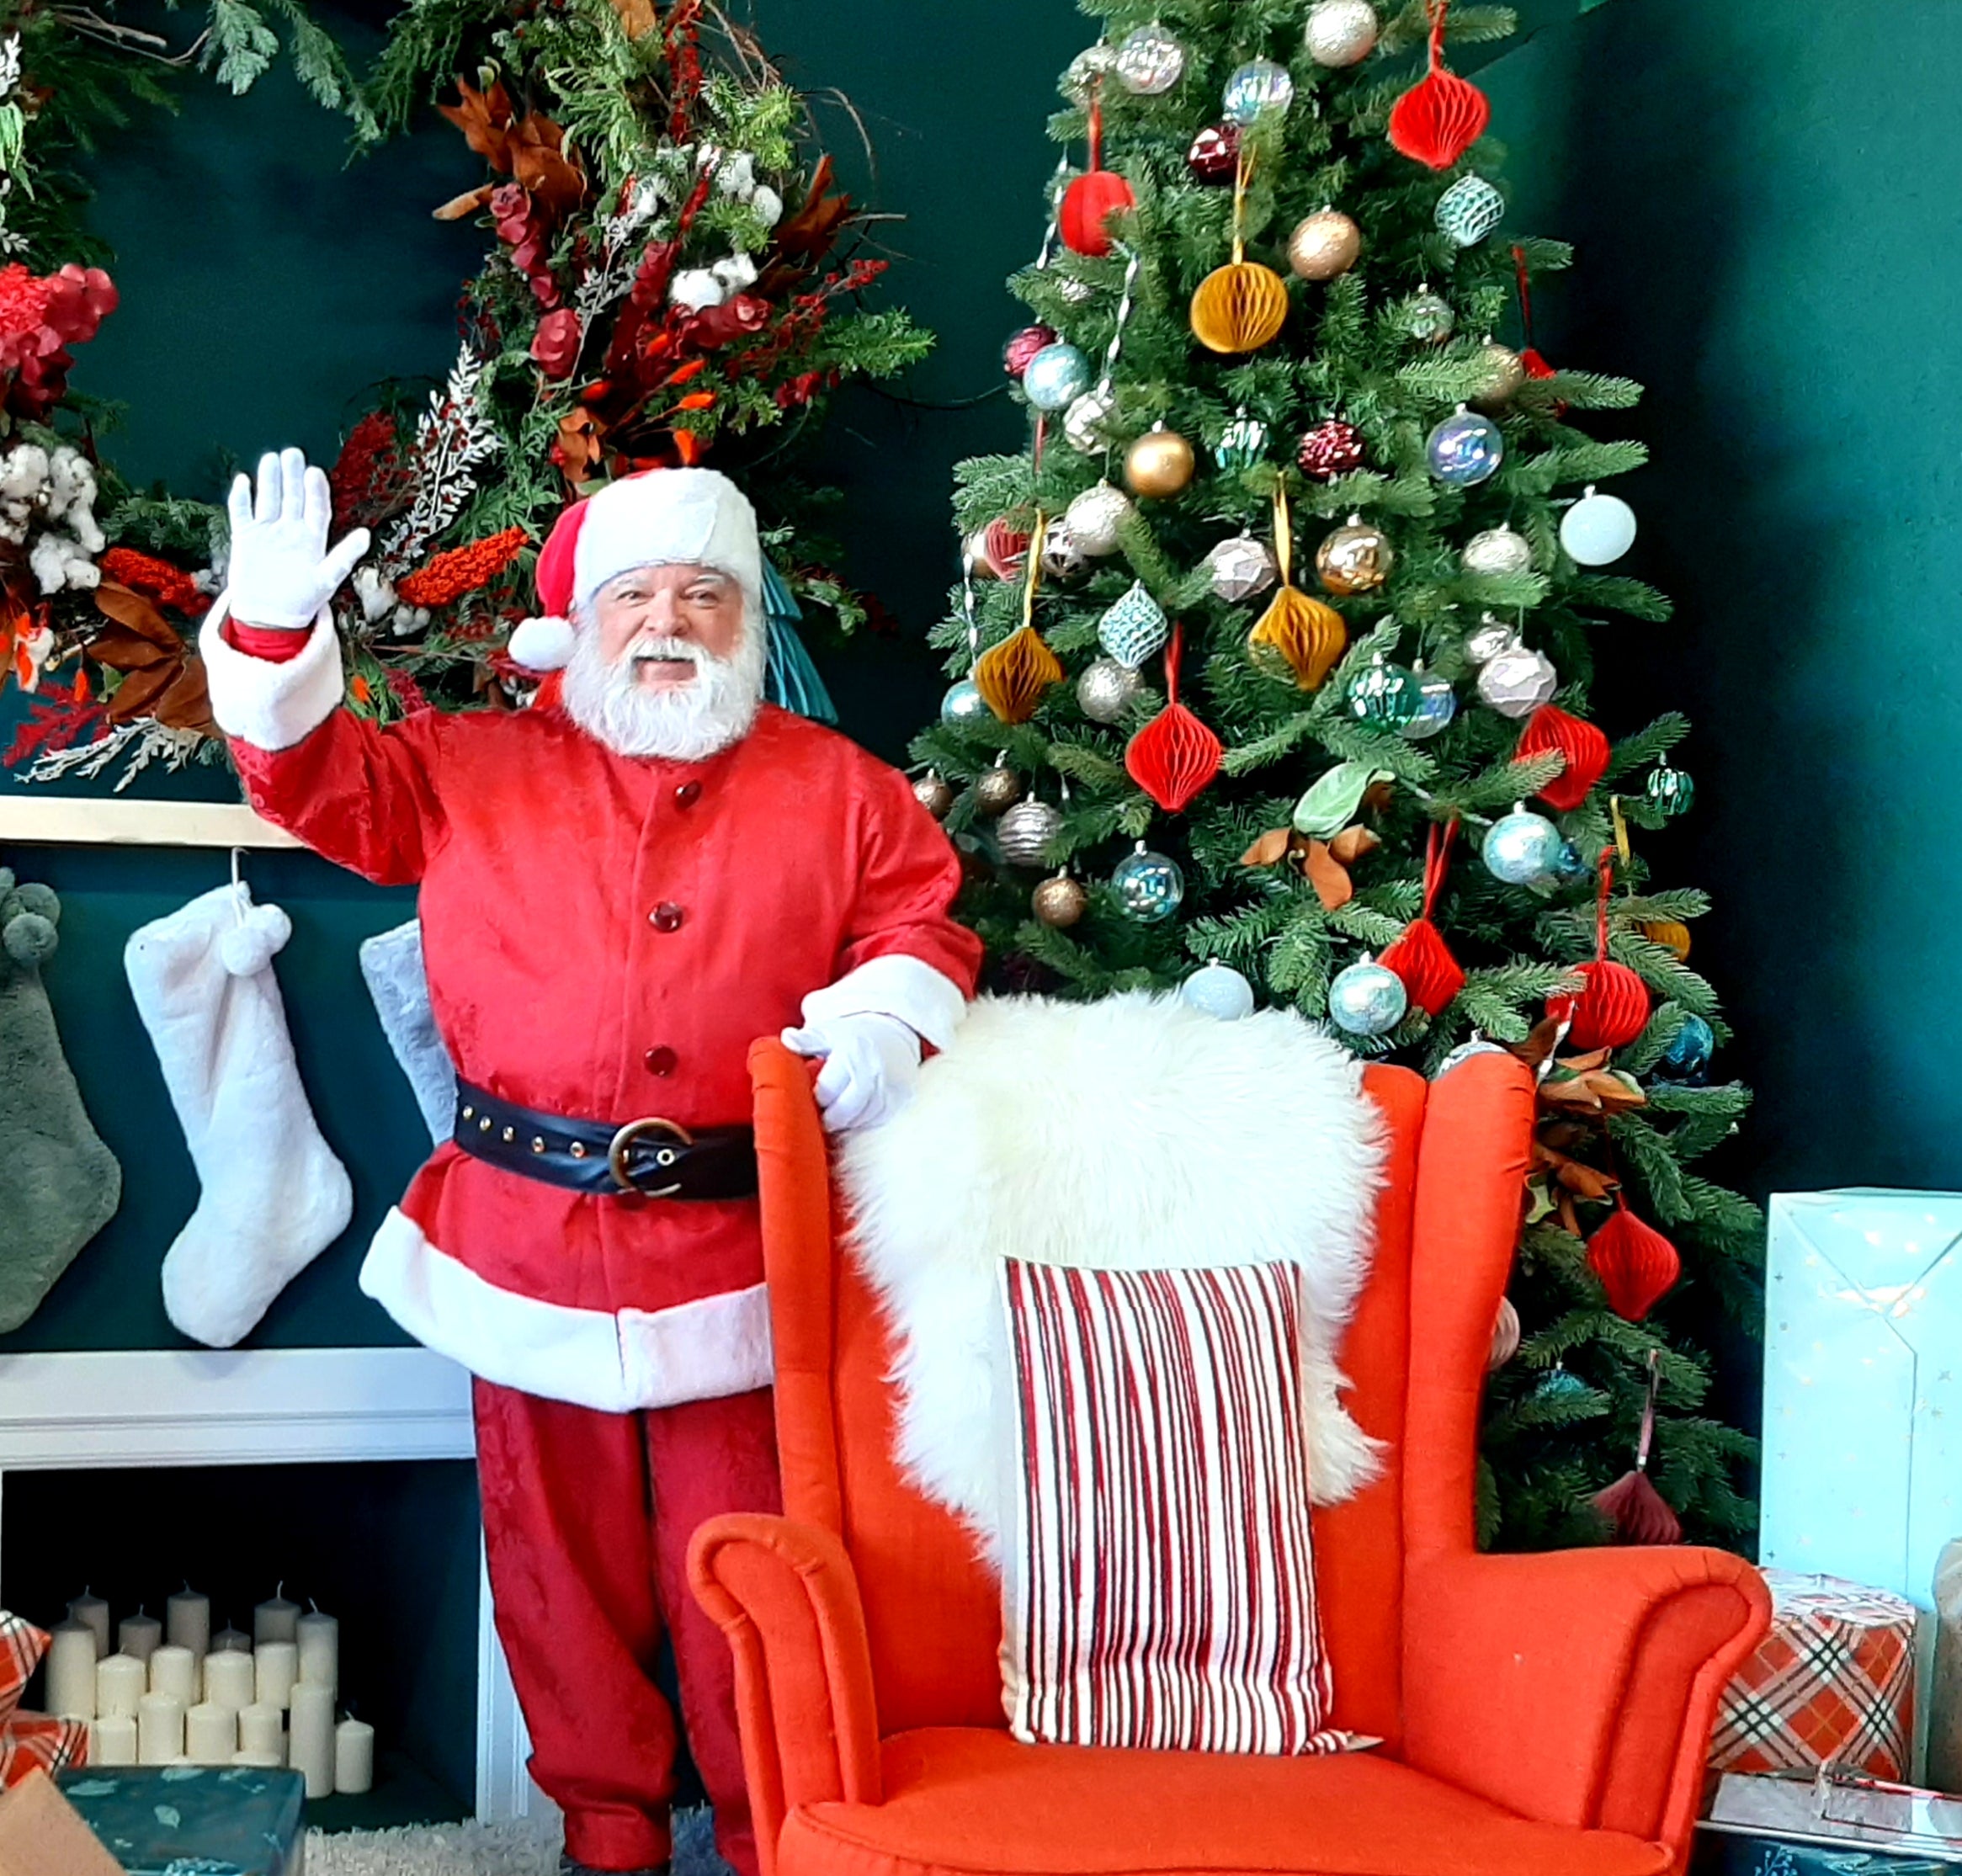 Santa standing in front of a decorated Christmas tree and fireplace, waving at the camera